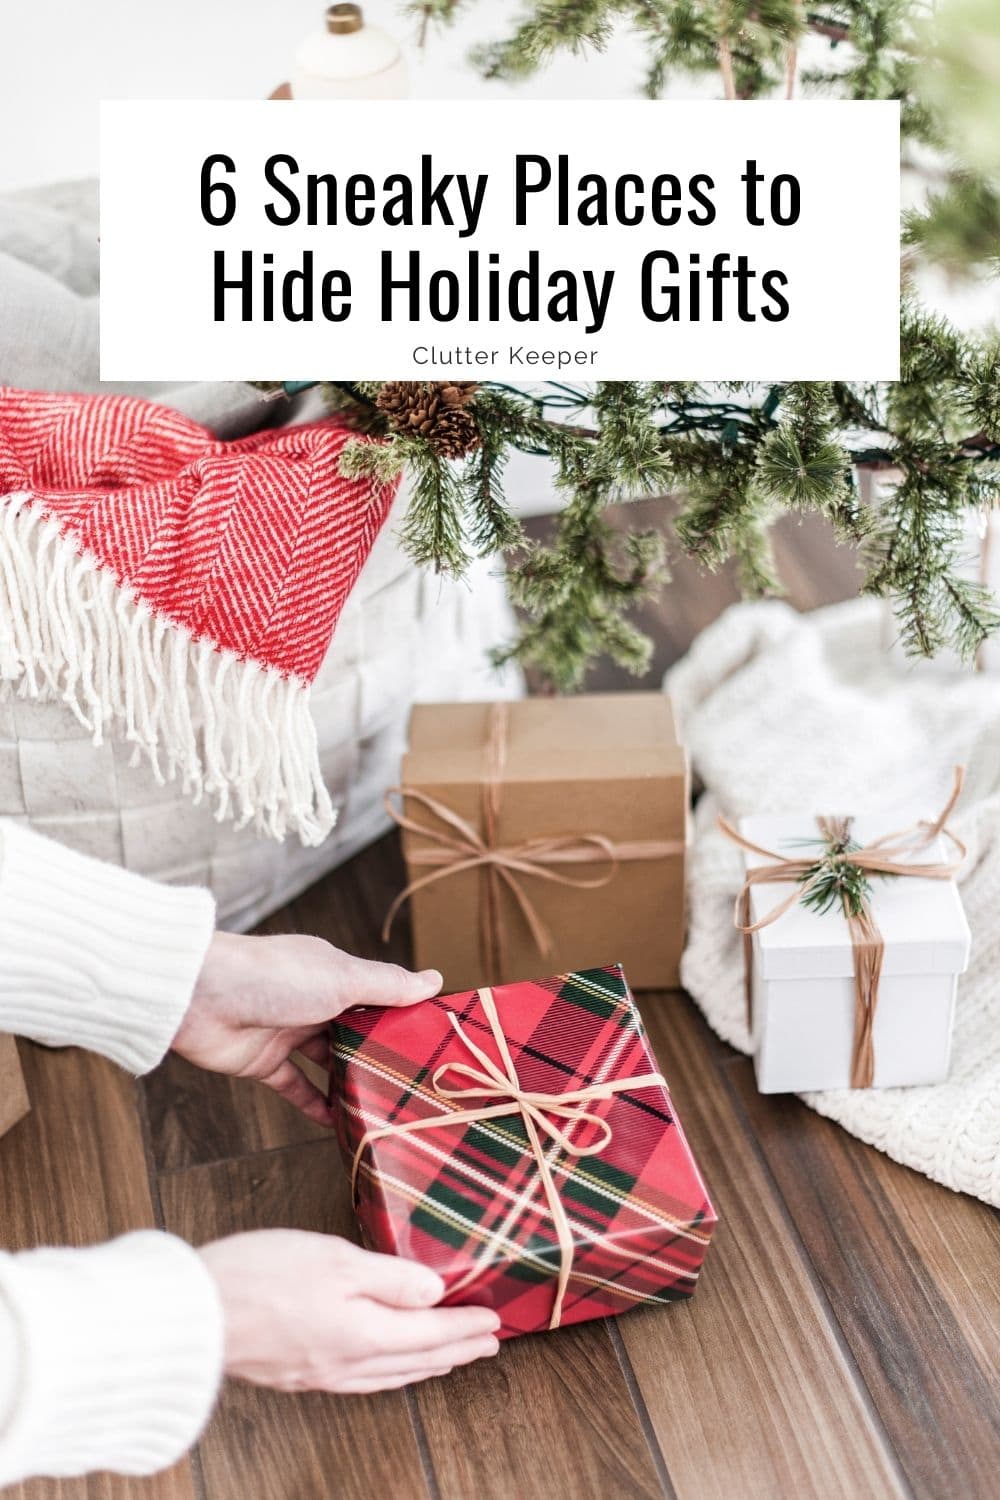 Person putting a wrapped gift under a Christmas tree with text overlay that reads 6 Sneaky Places to Hide Holiday Gifts.